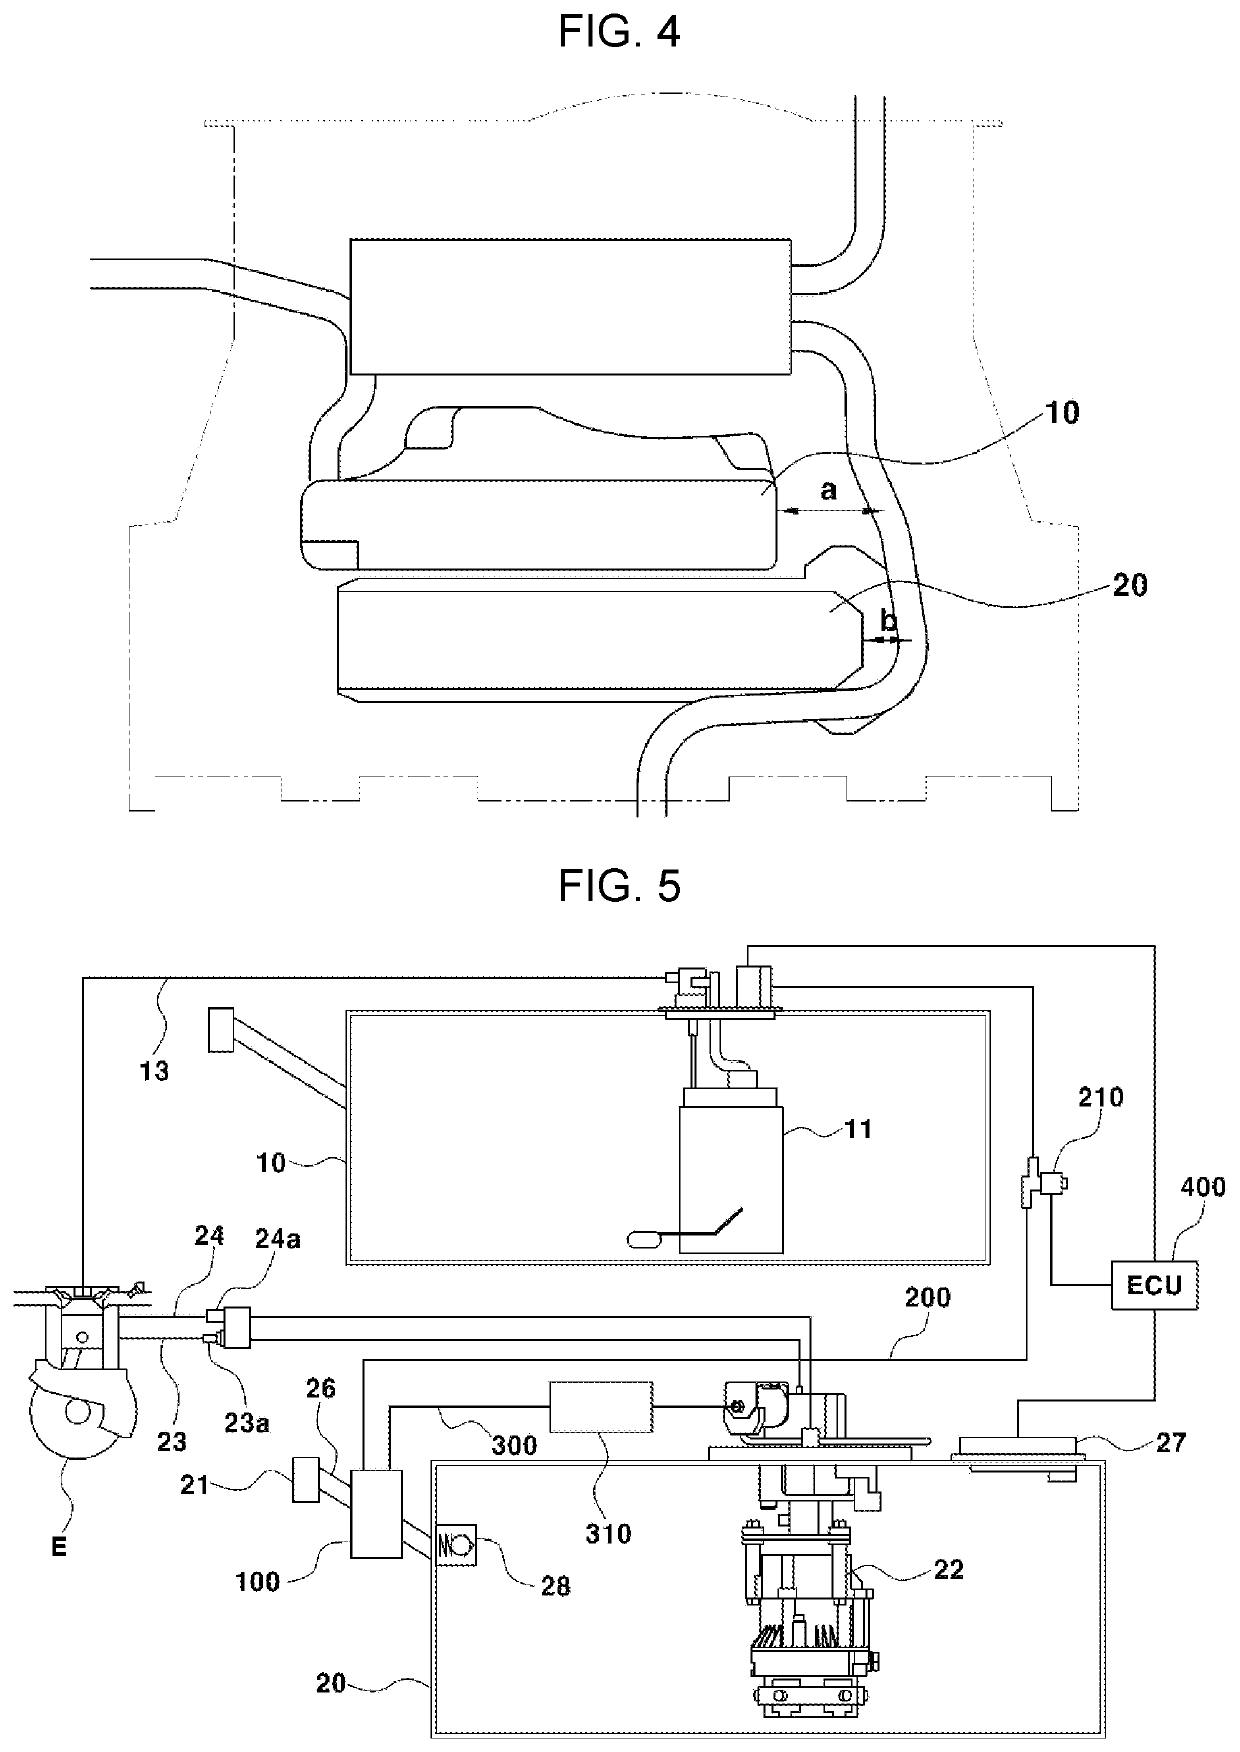 Apparatus and method for charging LPG fuel of bi-fuel vehicle